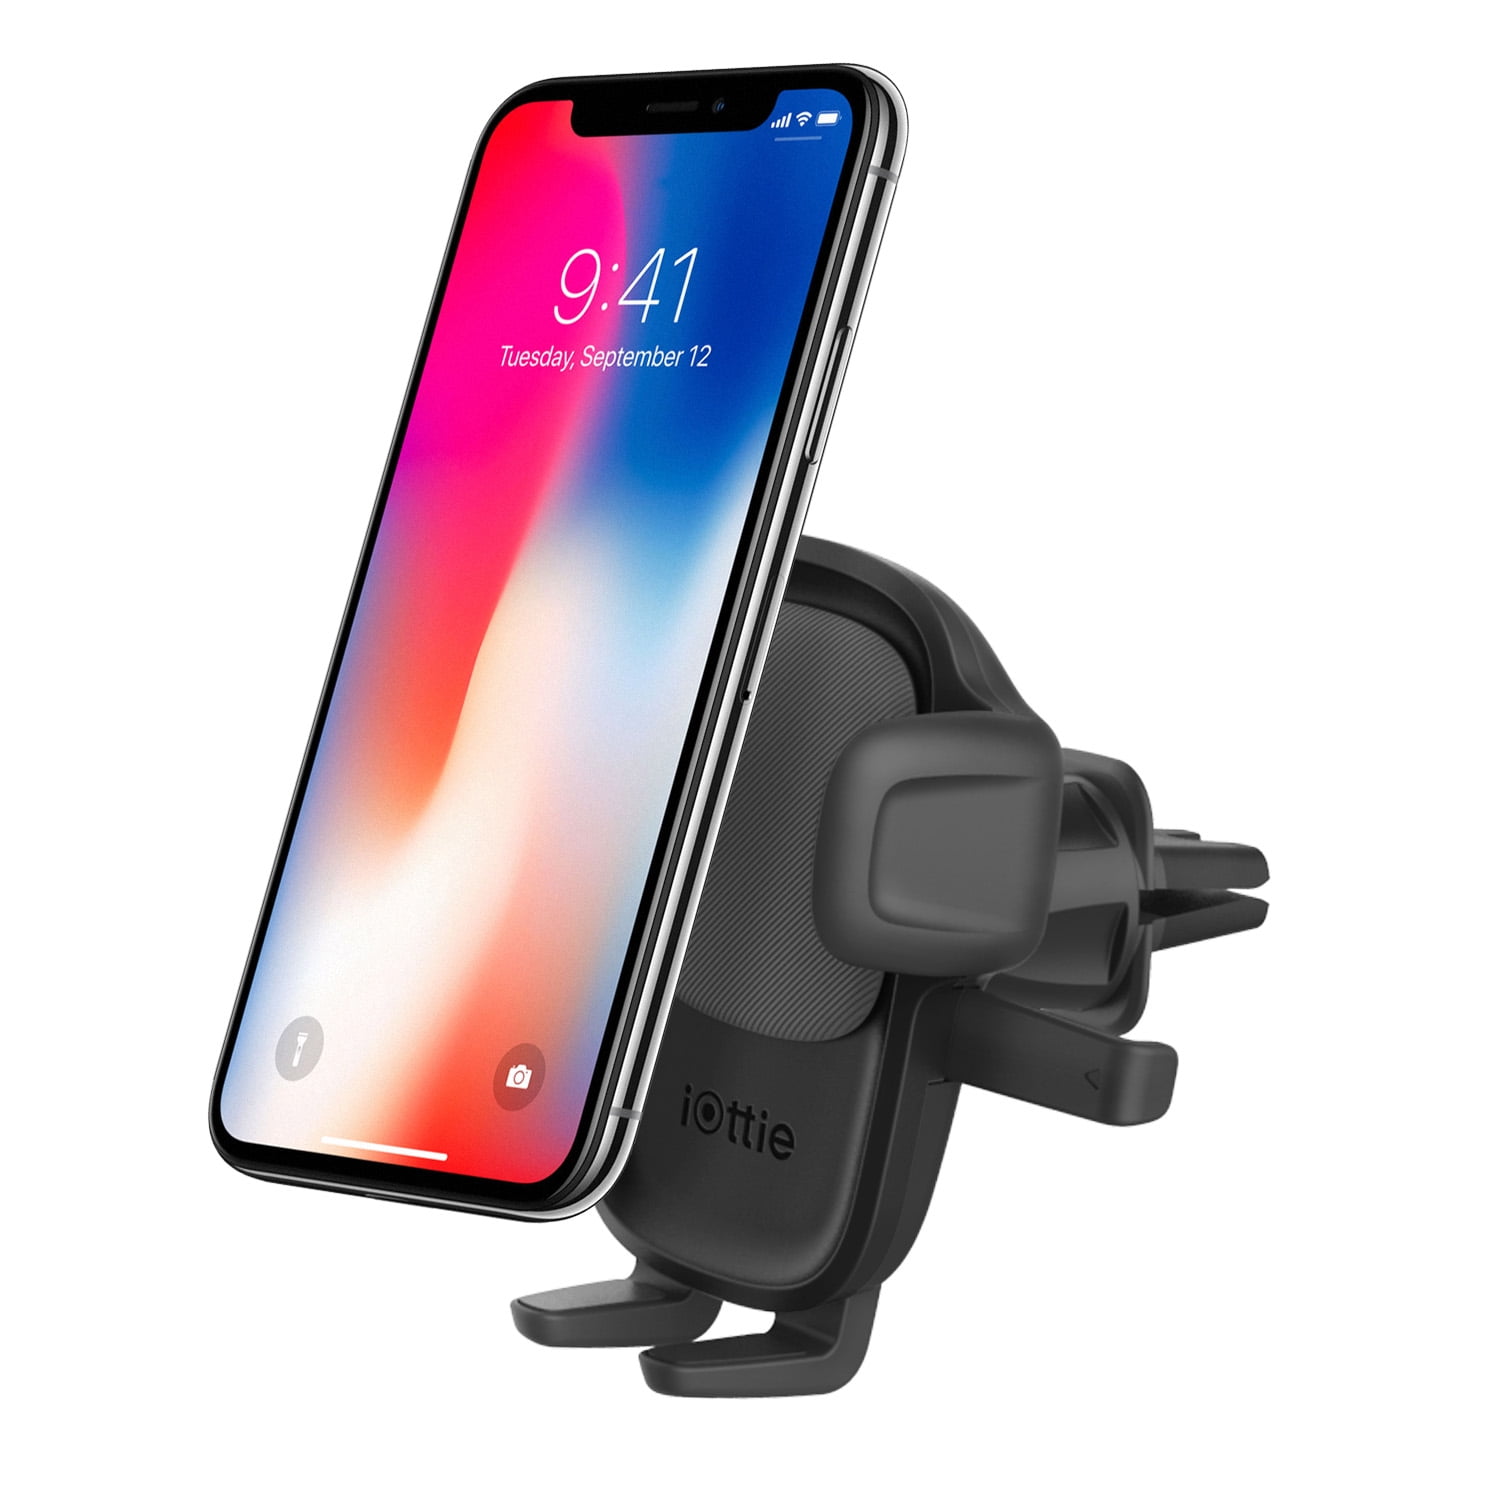 iOttie Easy One Touch 5 Air Vent Car Mount and Universal Phone Holder